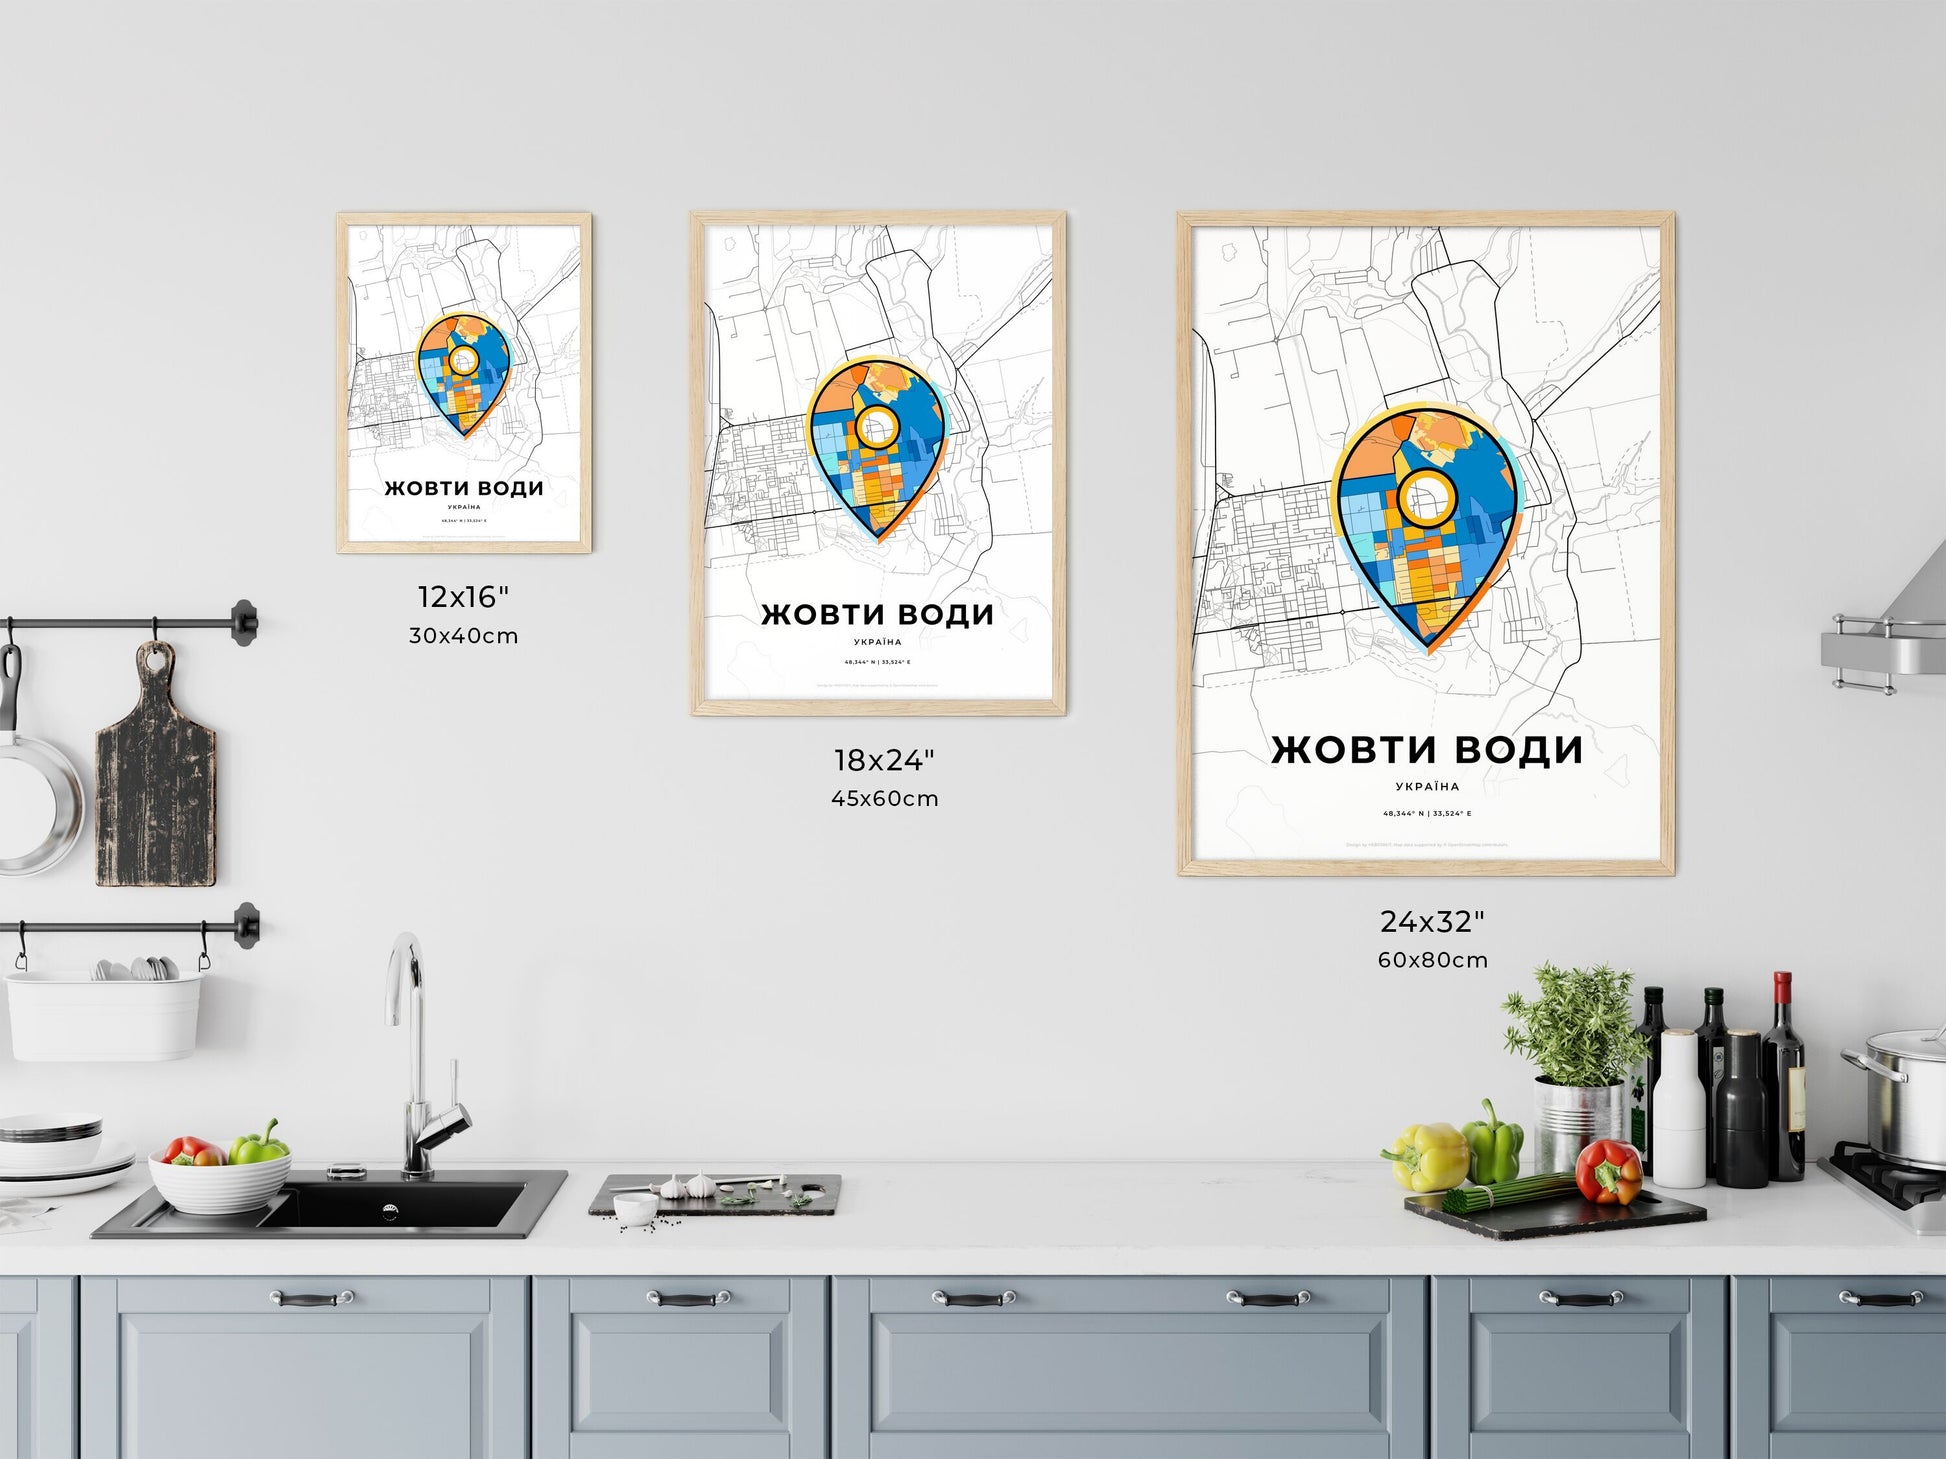 ZHOVTI VODY UKRAINE minimal art map with a colorful icon. Where it all began, Couple map gift.